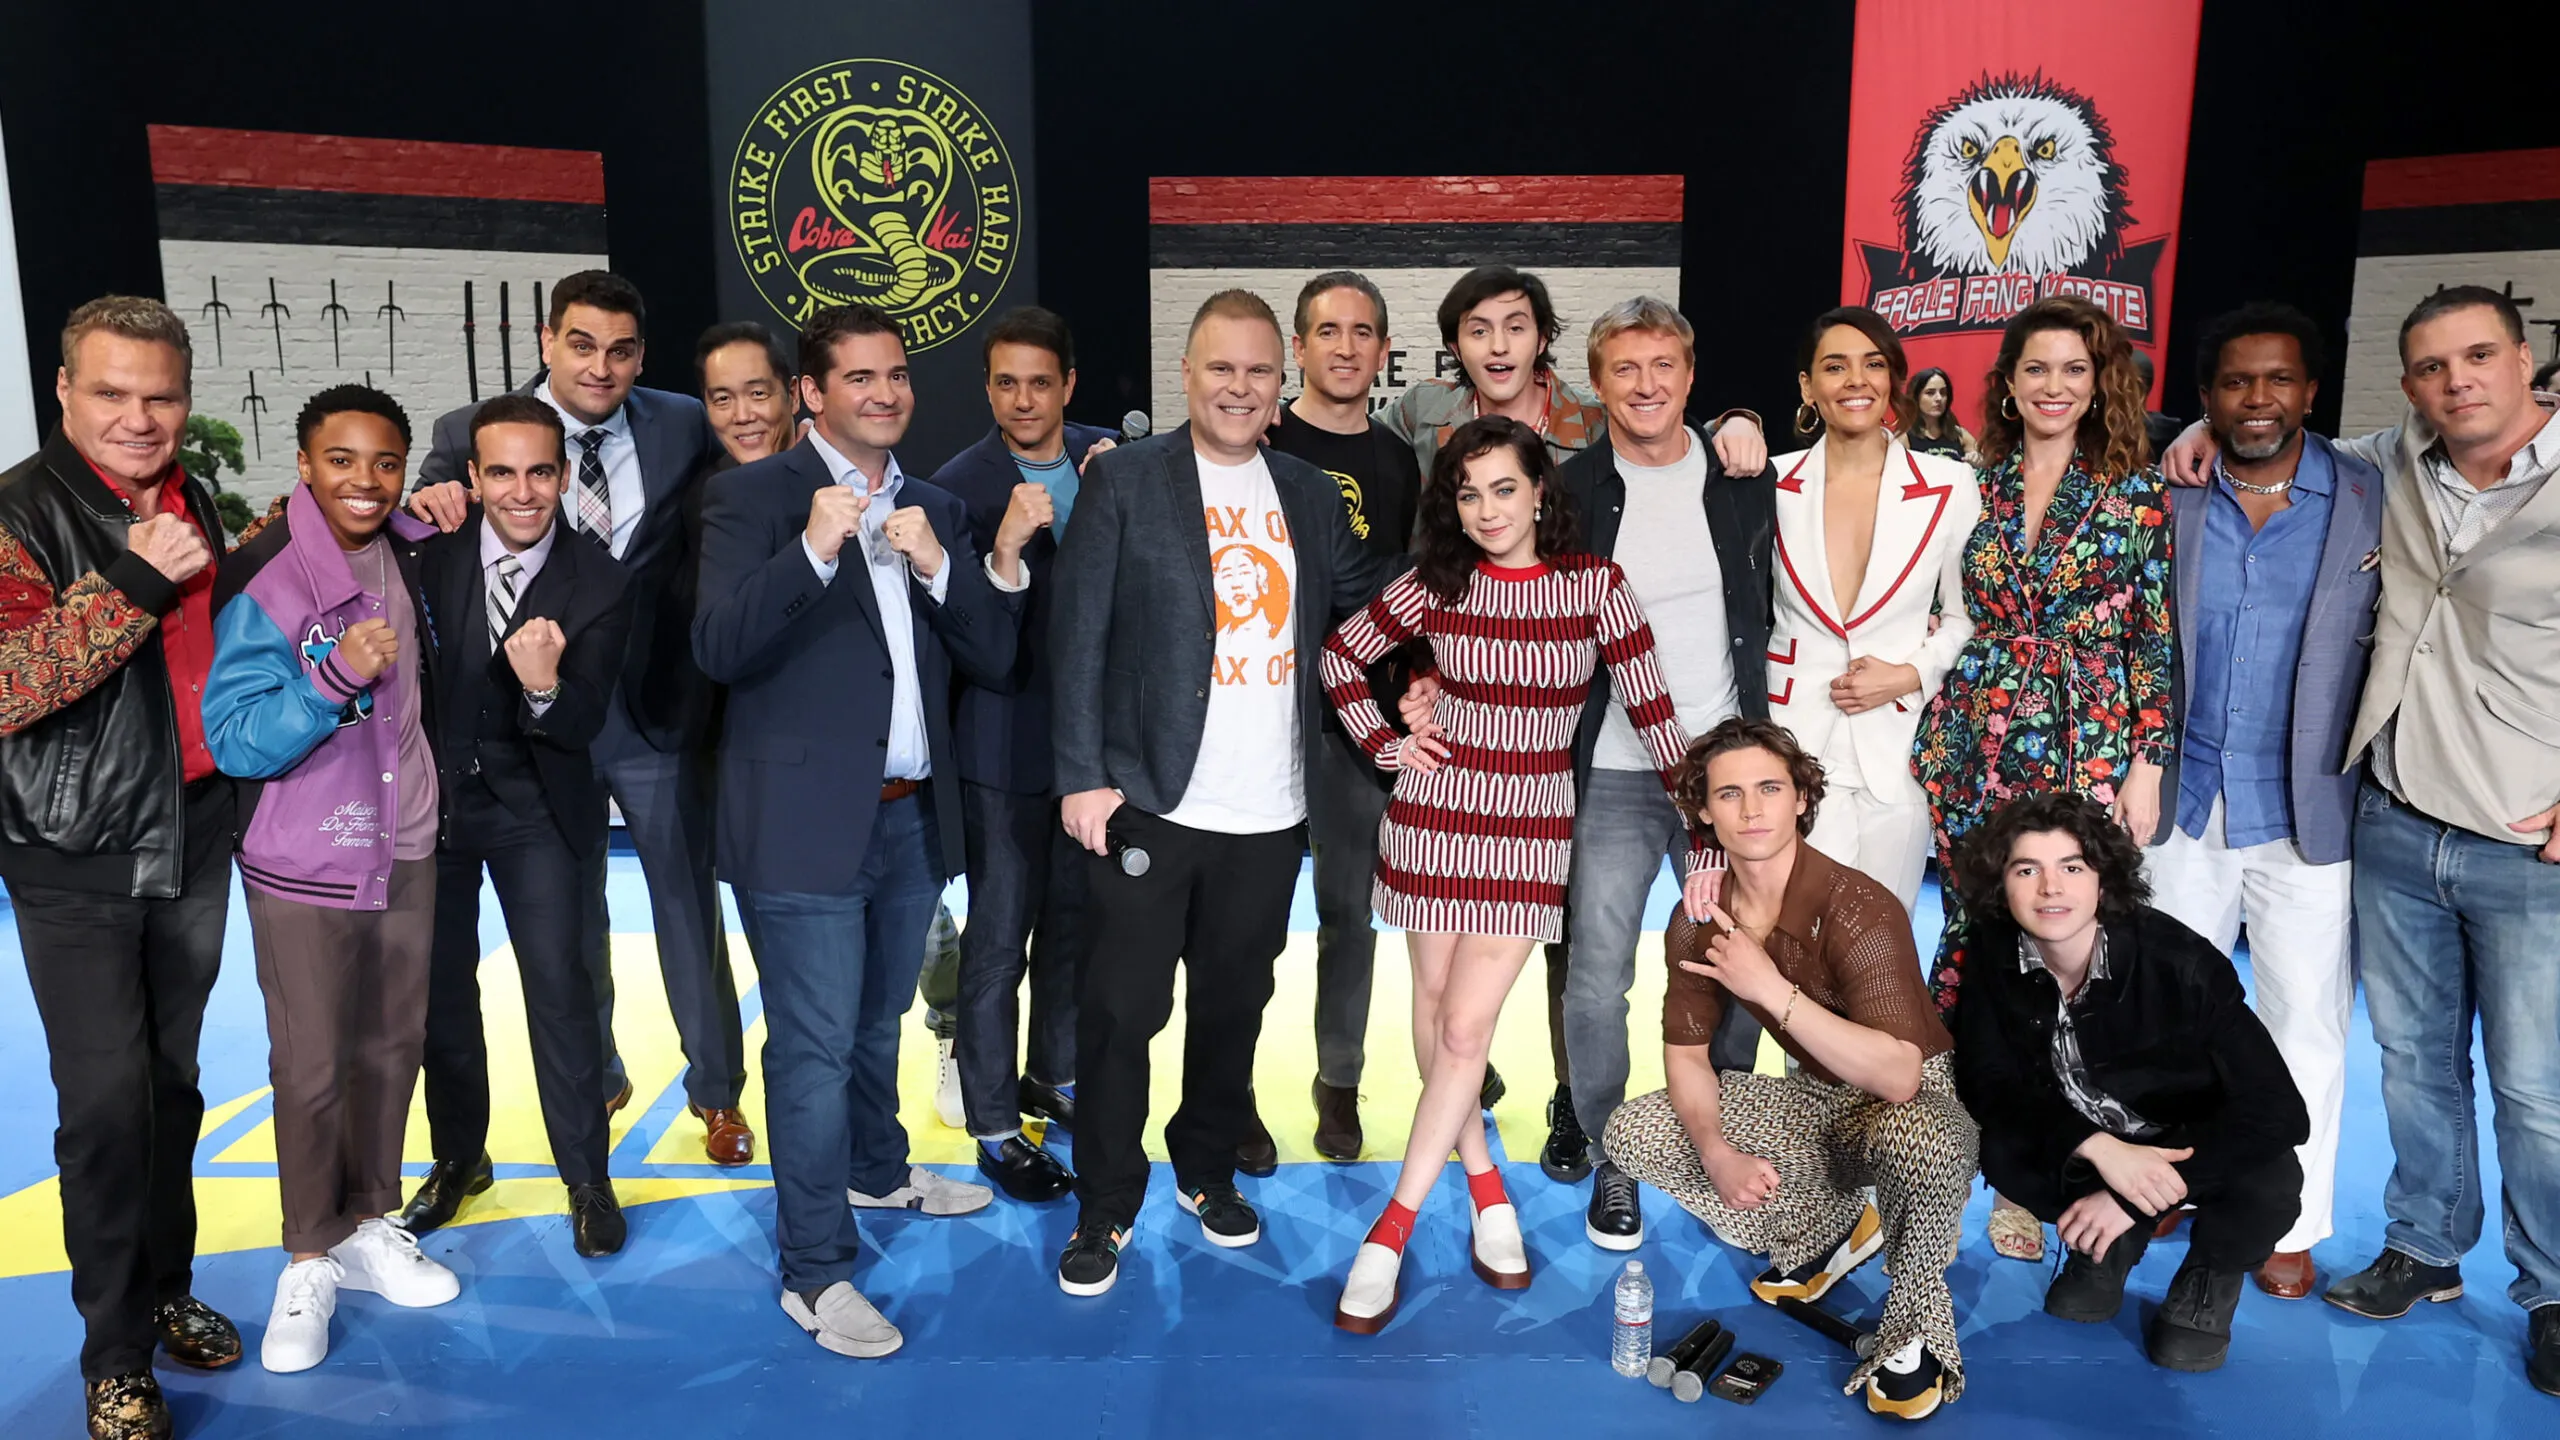 How Old Is the Cobra Kai Cast?